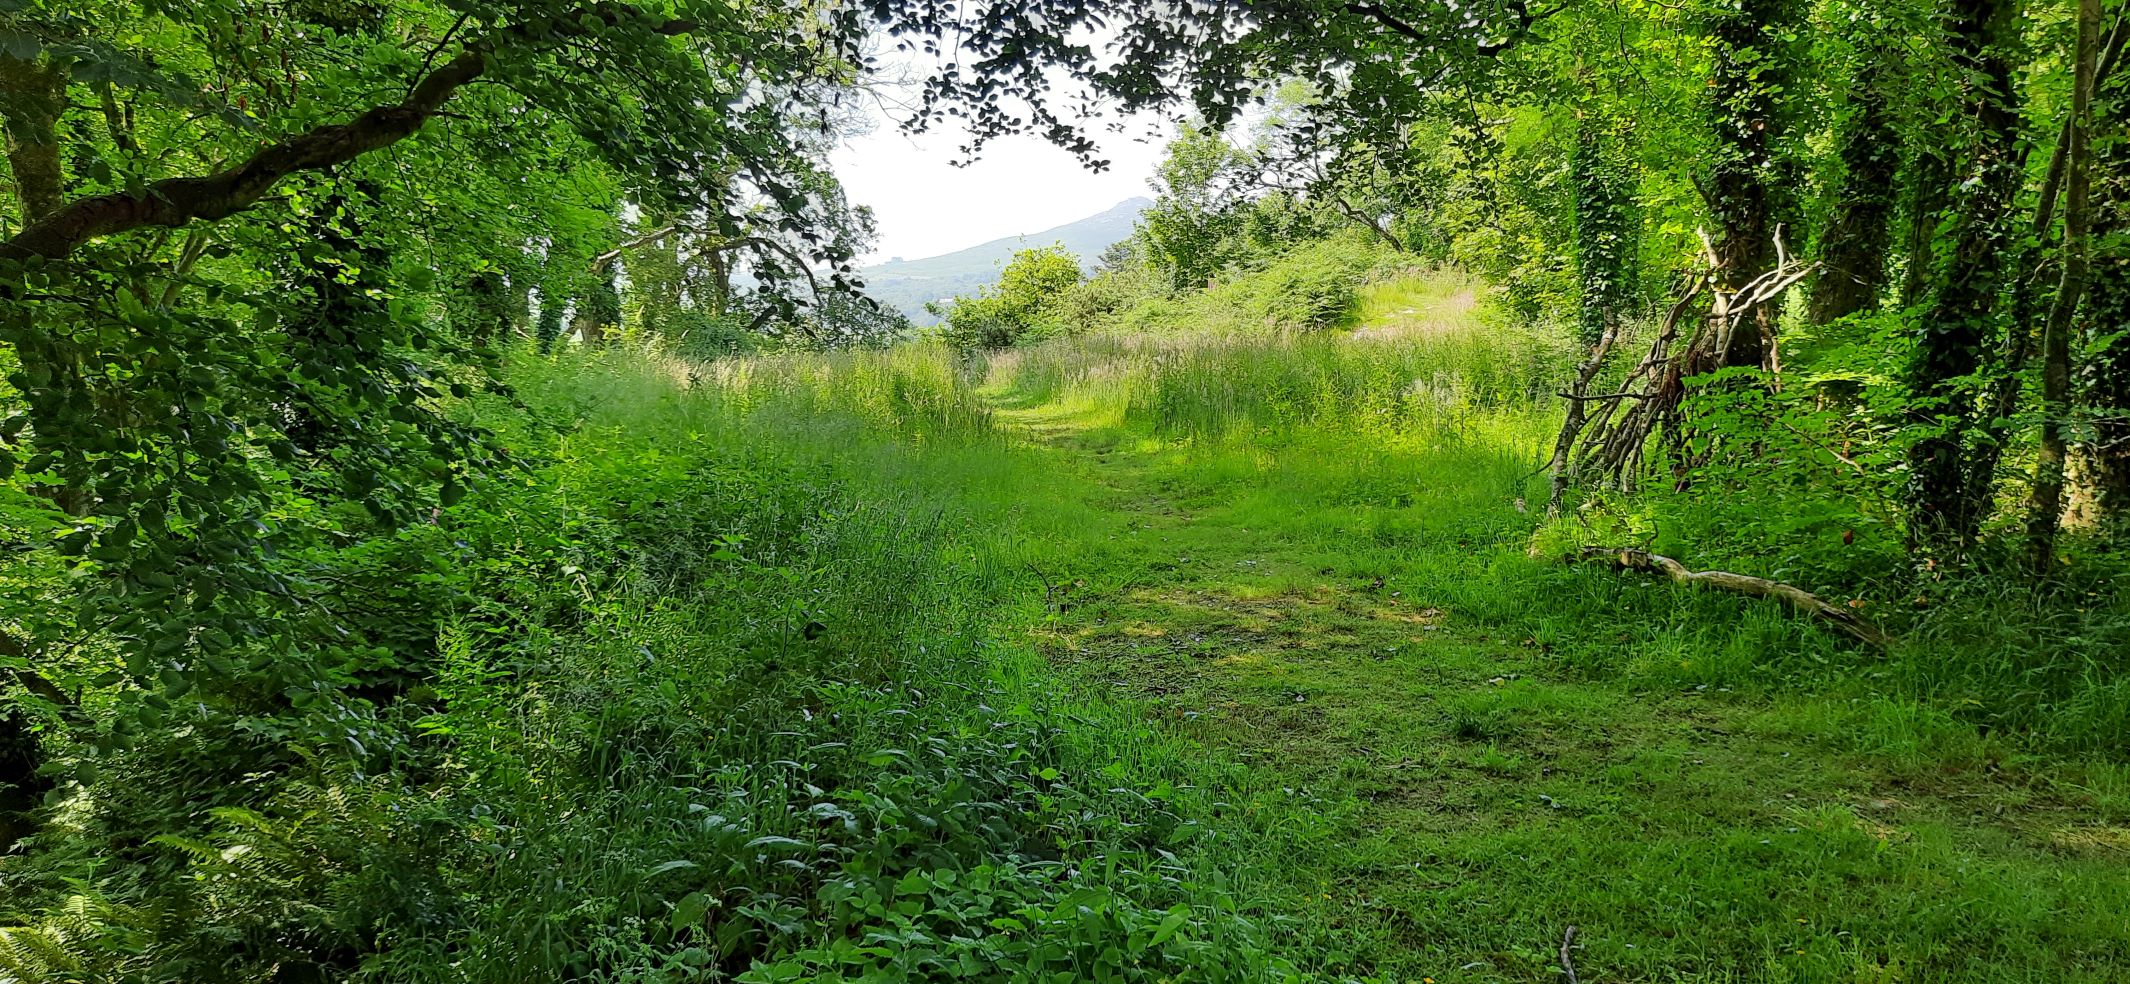 View of path through long grass and hills beyond